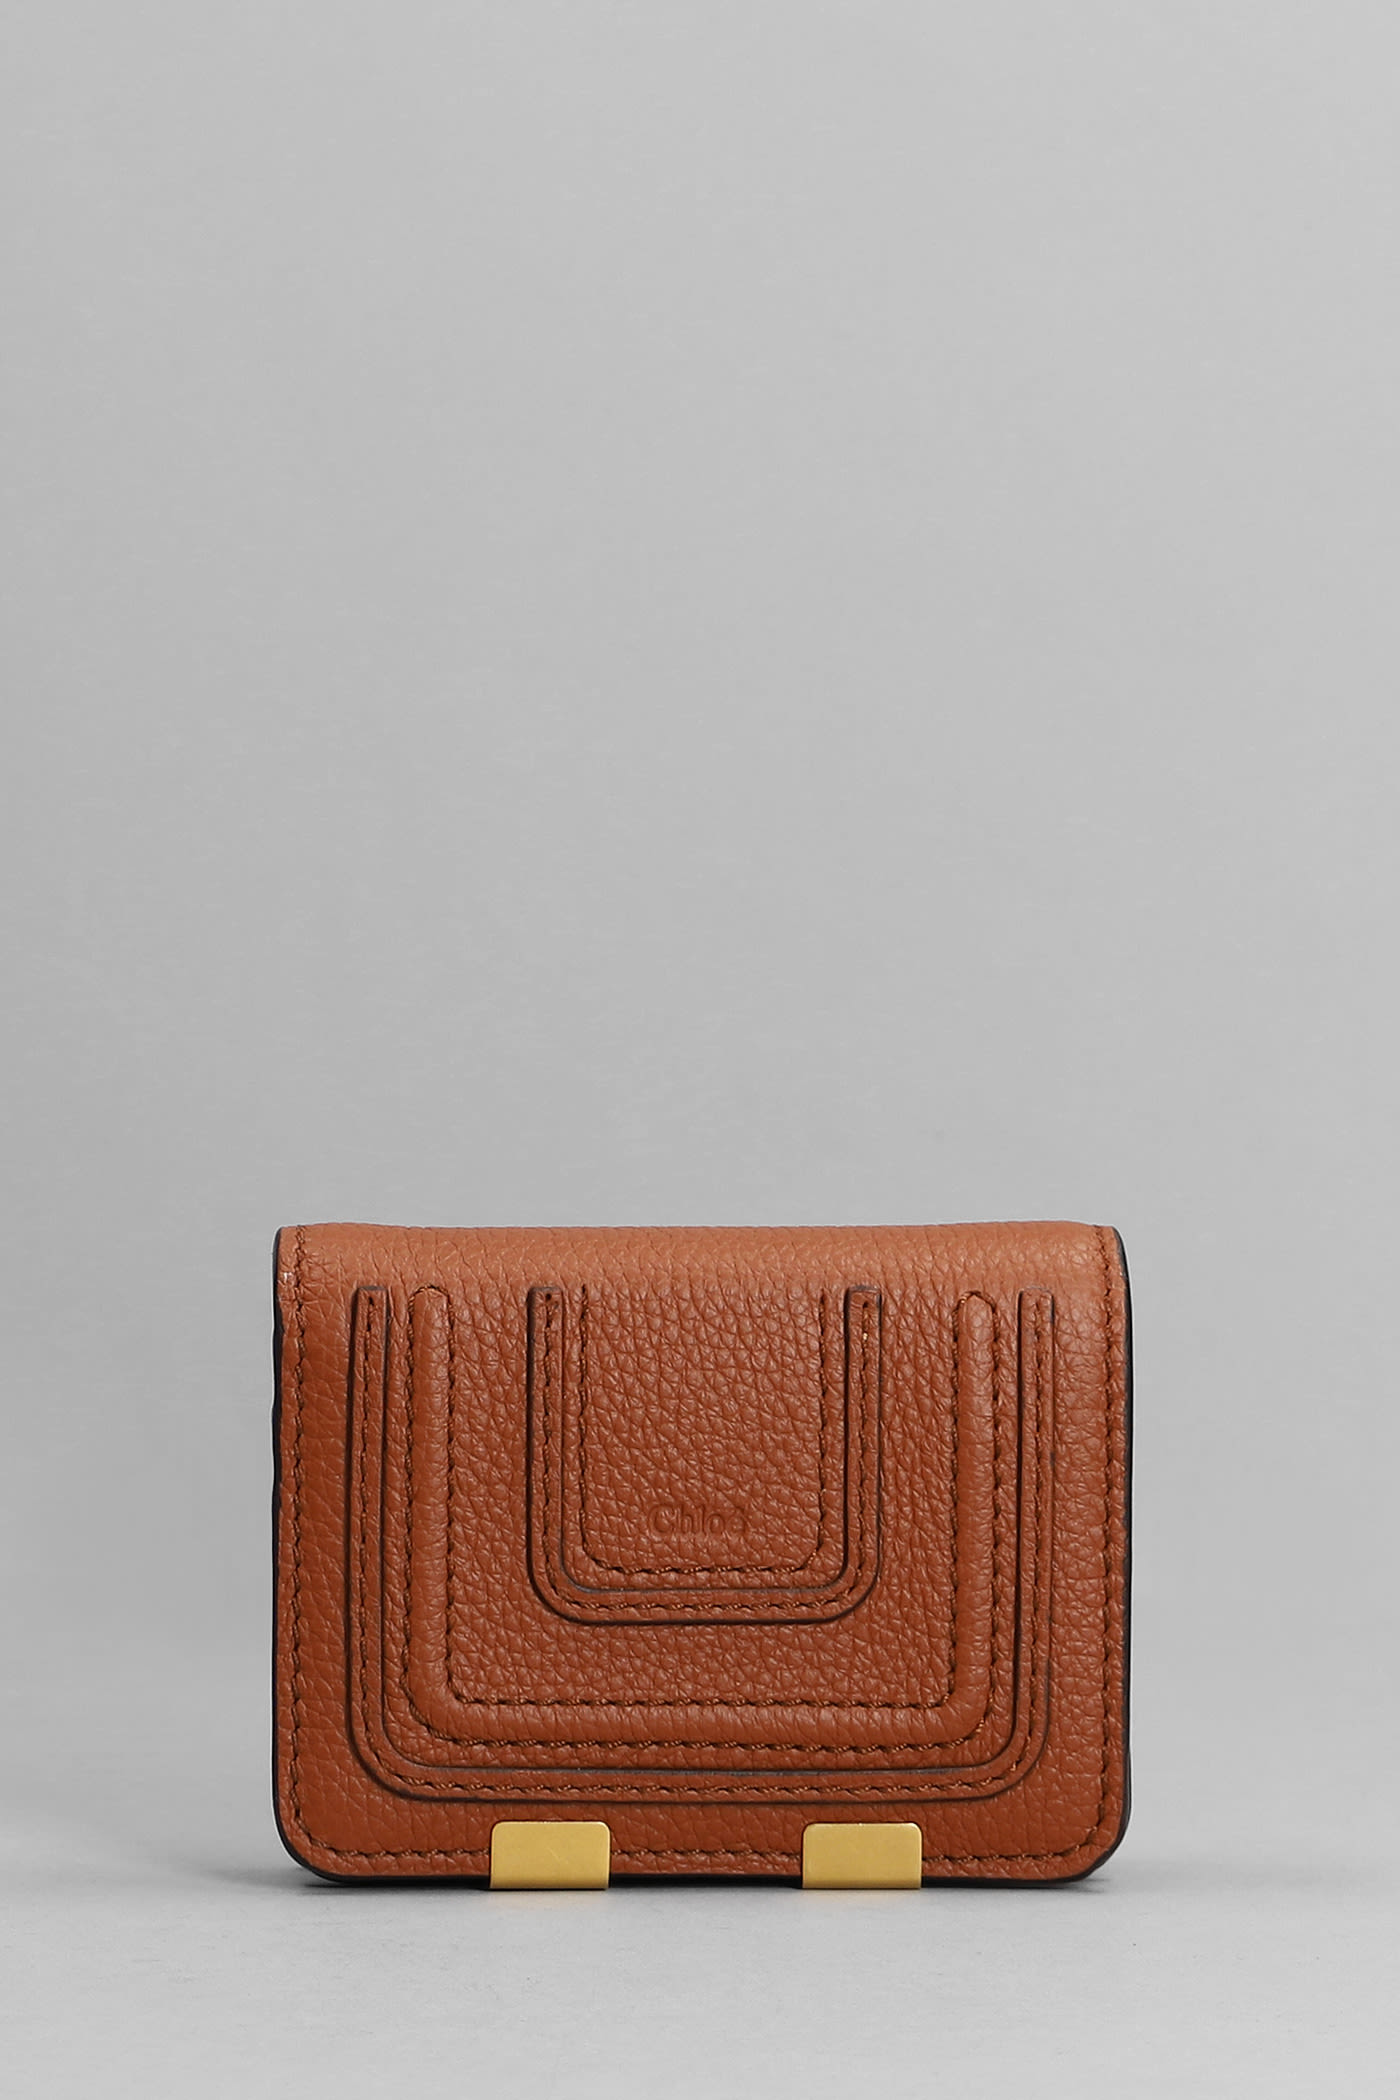 Chloé Marcie Wallet In Leather Color Leather